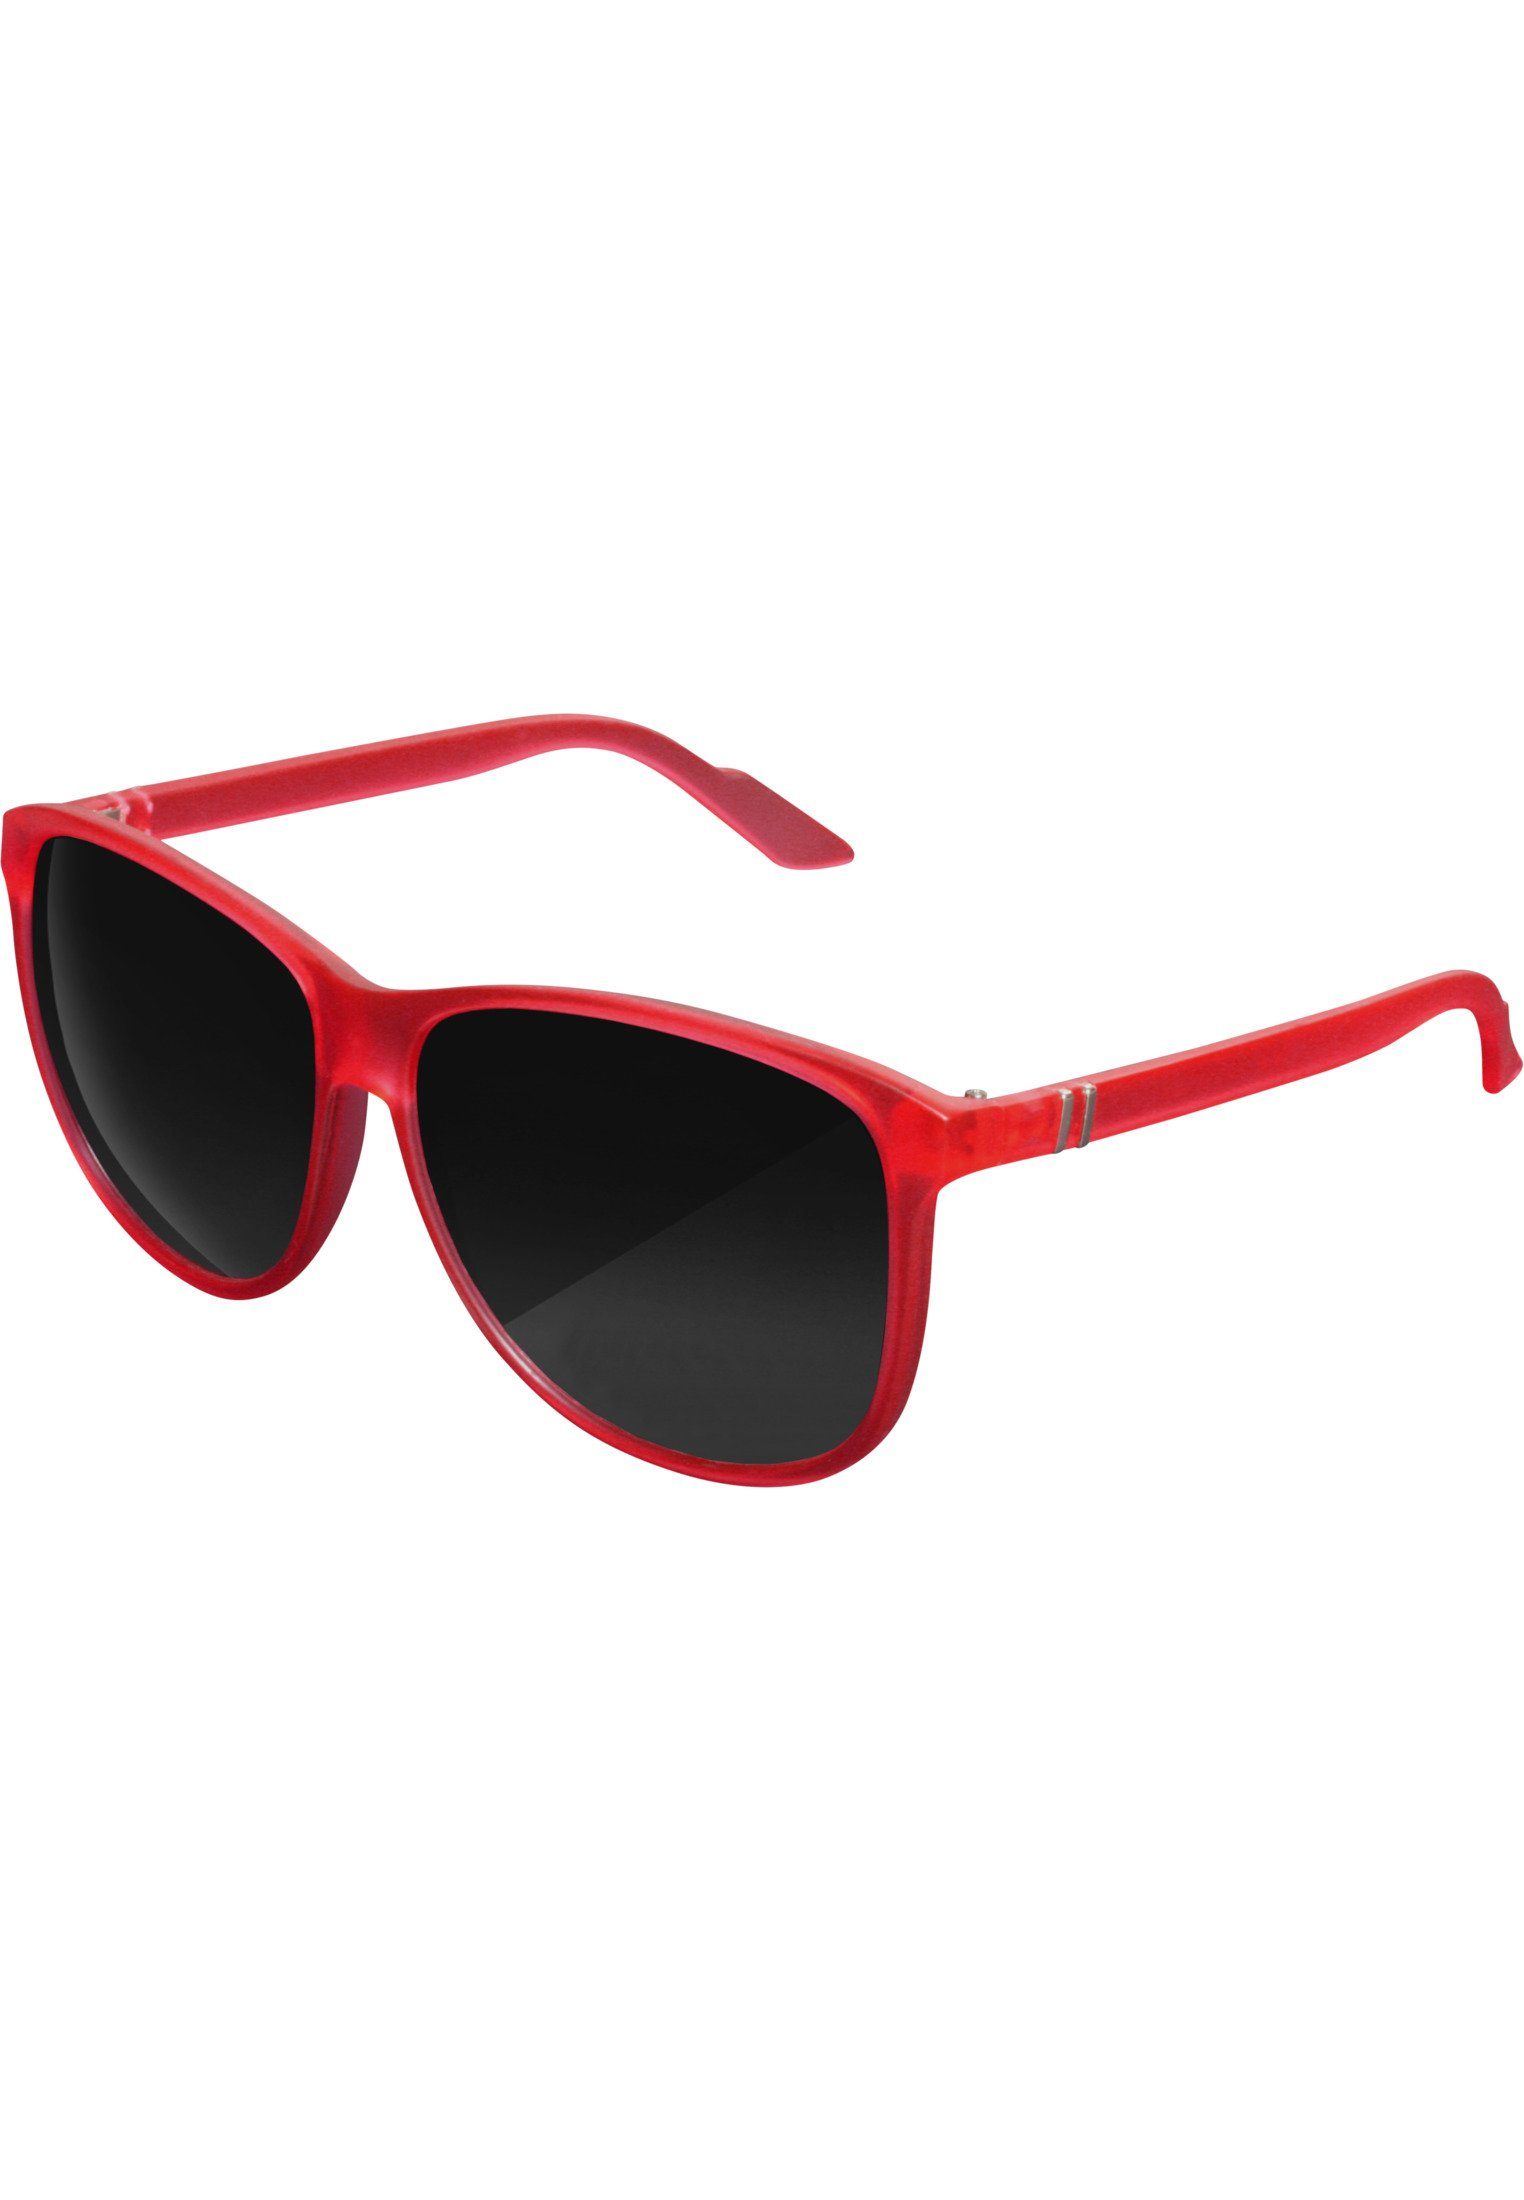 Sonnenbrille Sunglasses MSTRDS red Accessoires Chirwa